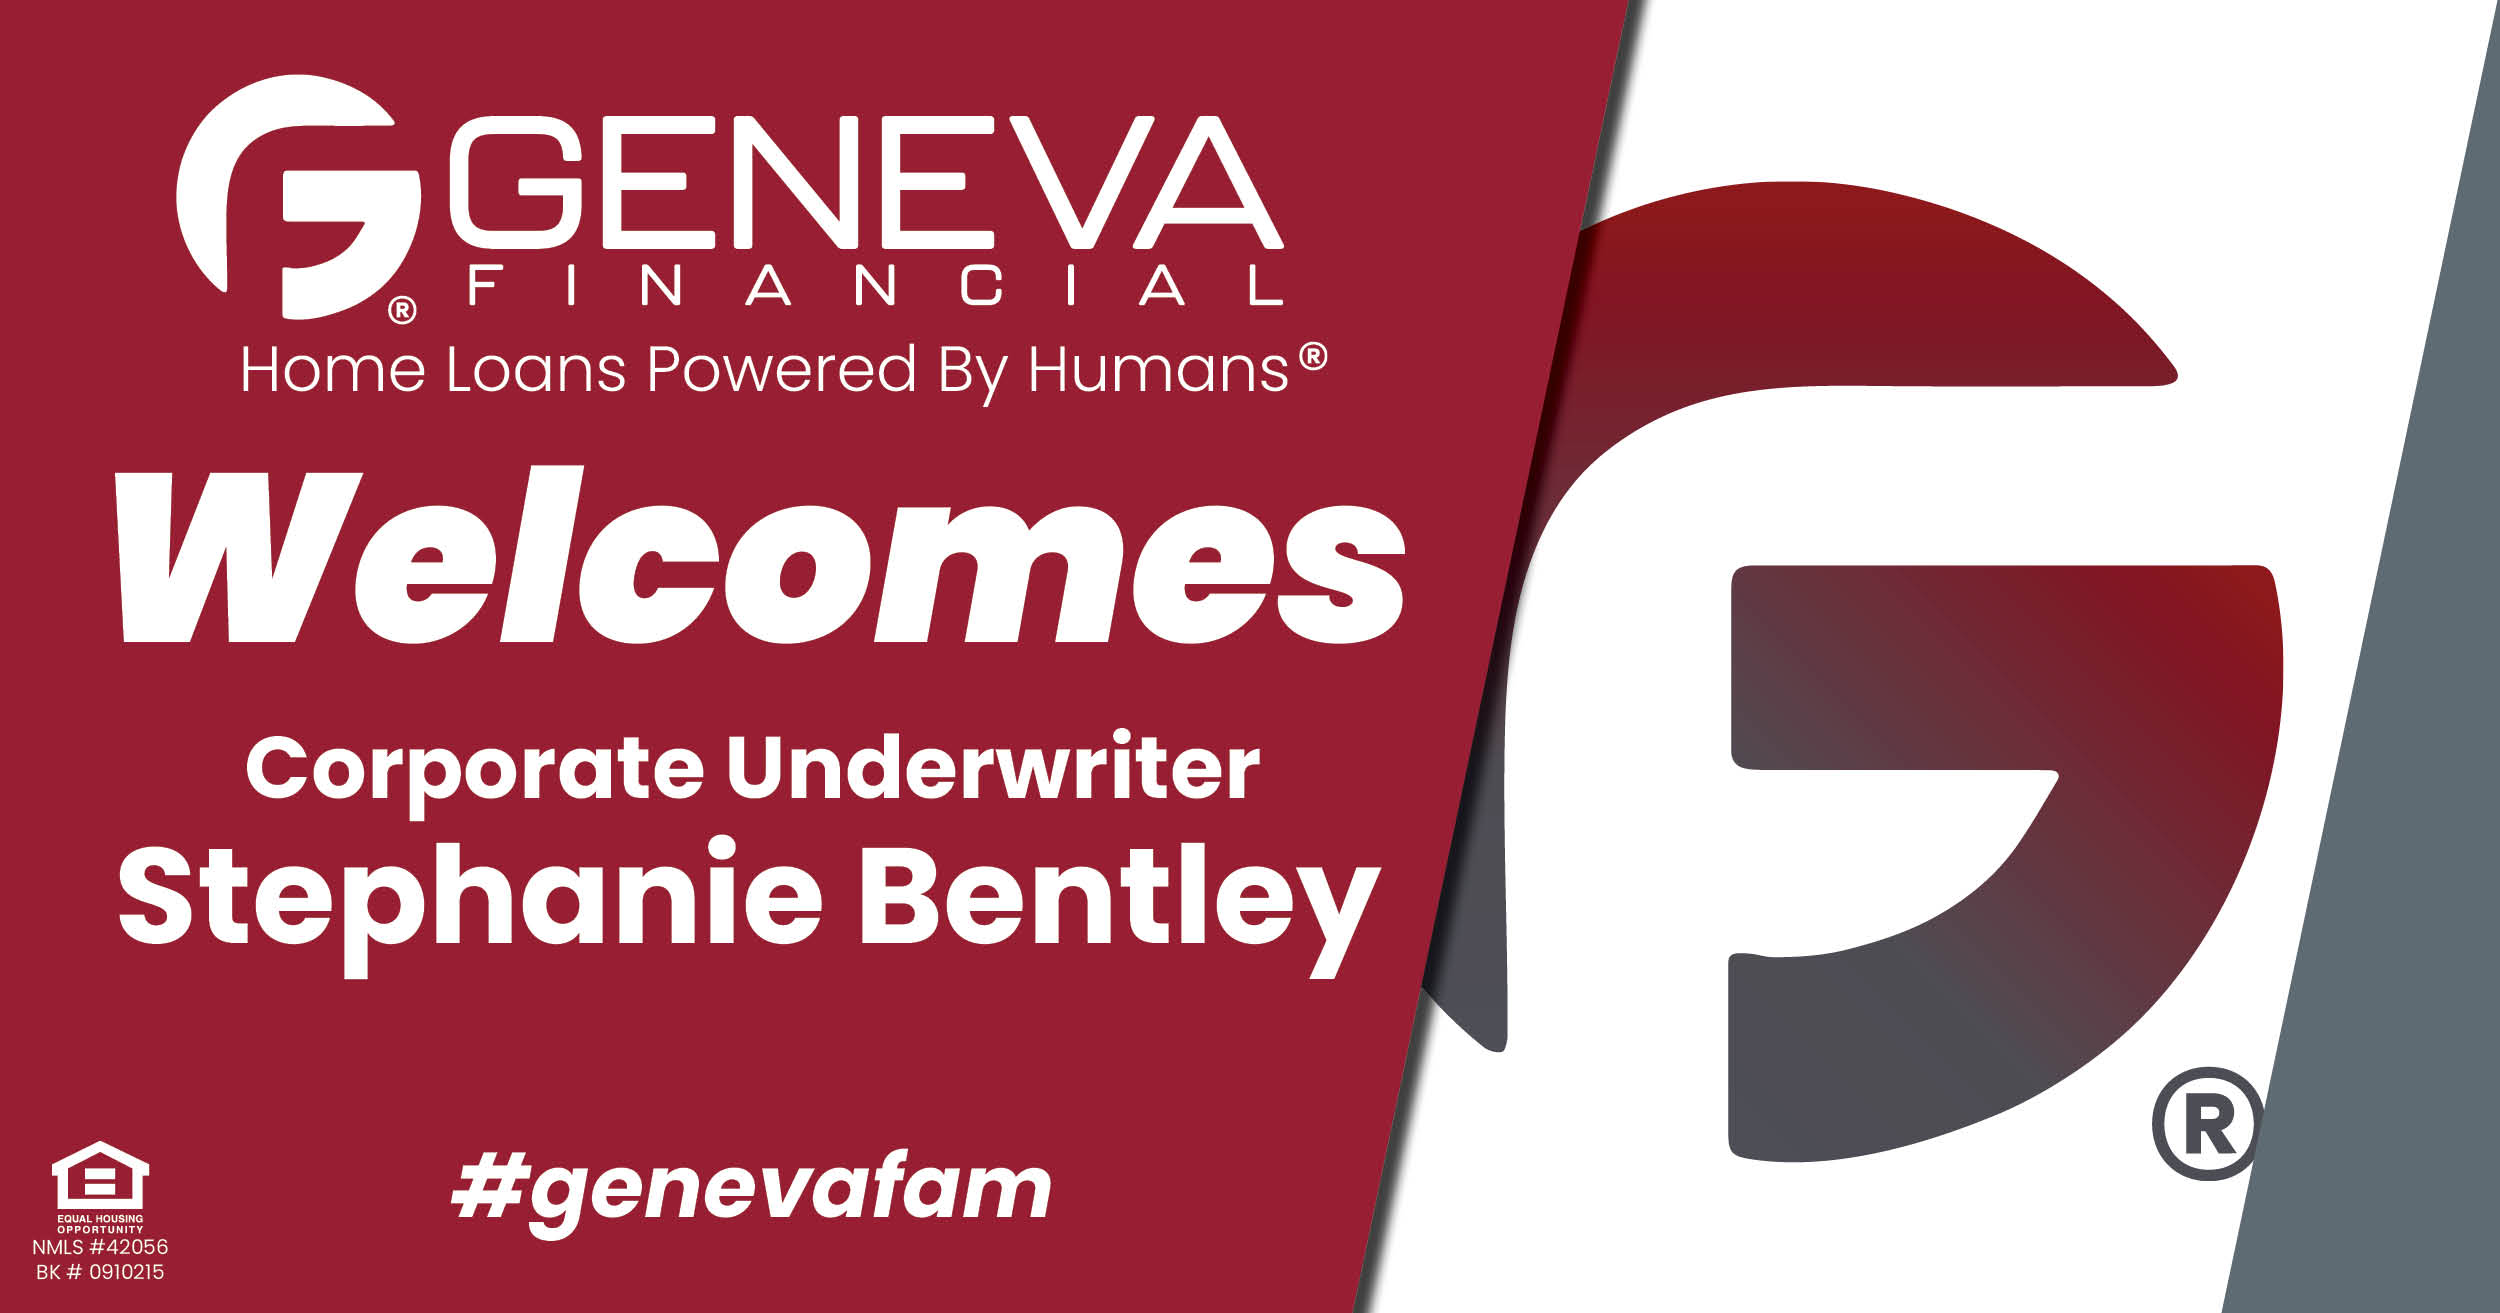 Geneva Financial Welcomes New Underwriter Stephanie Bentley to Geneva Corporate – Home Loans Powered by Humans®.